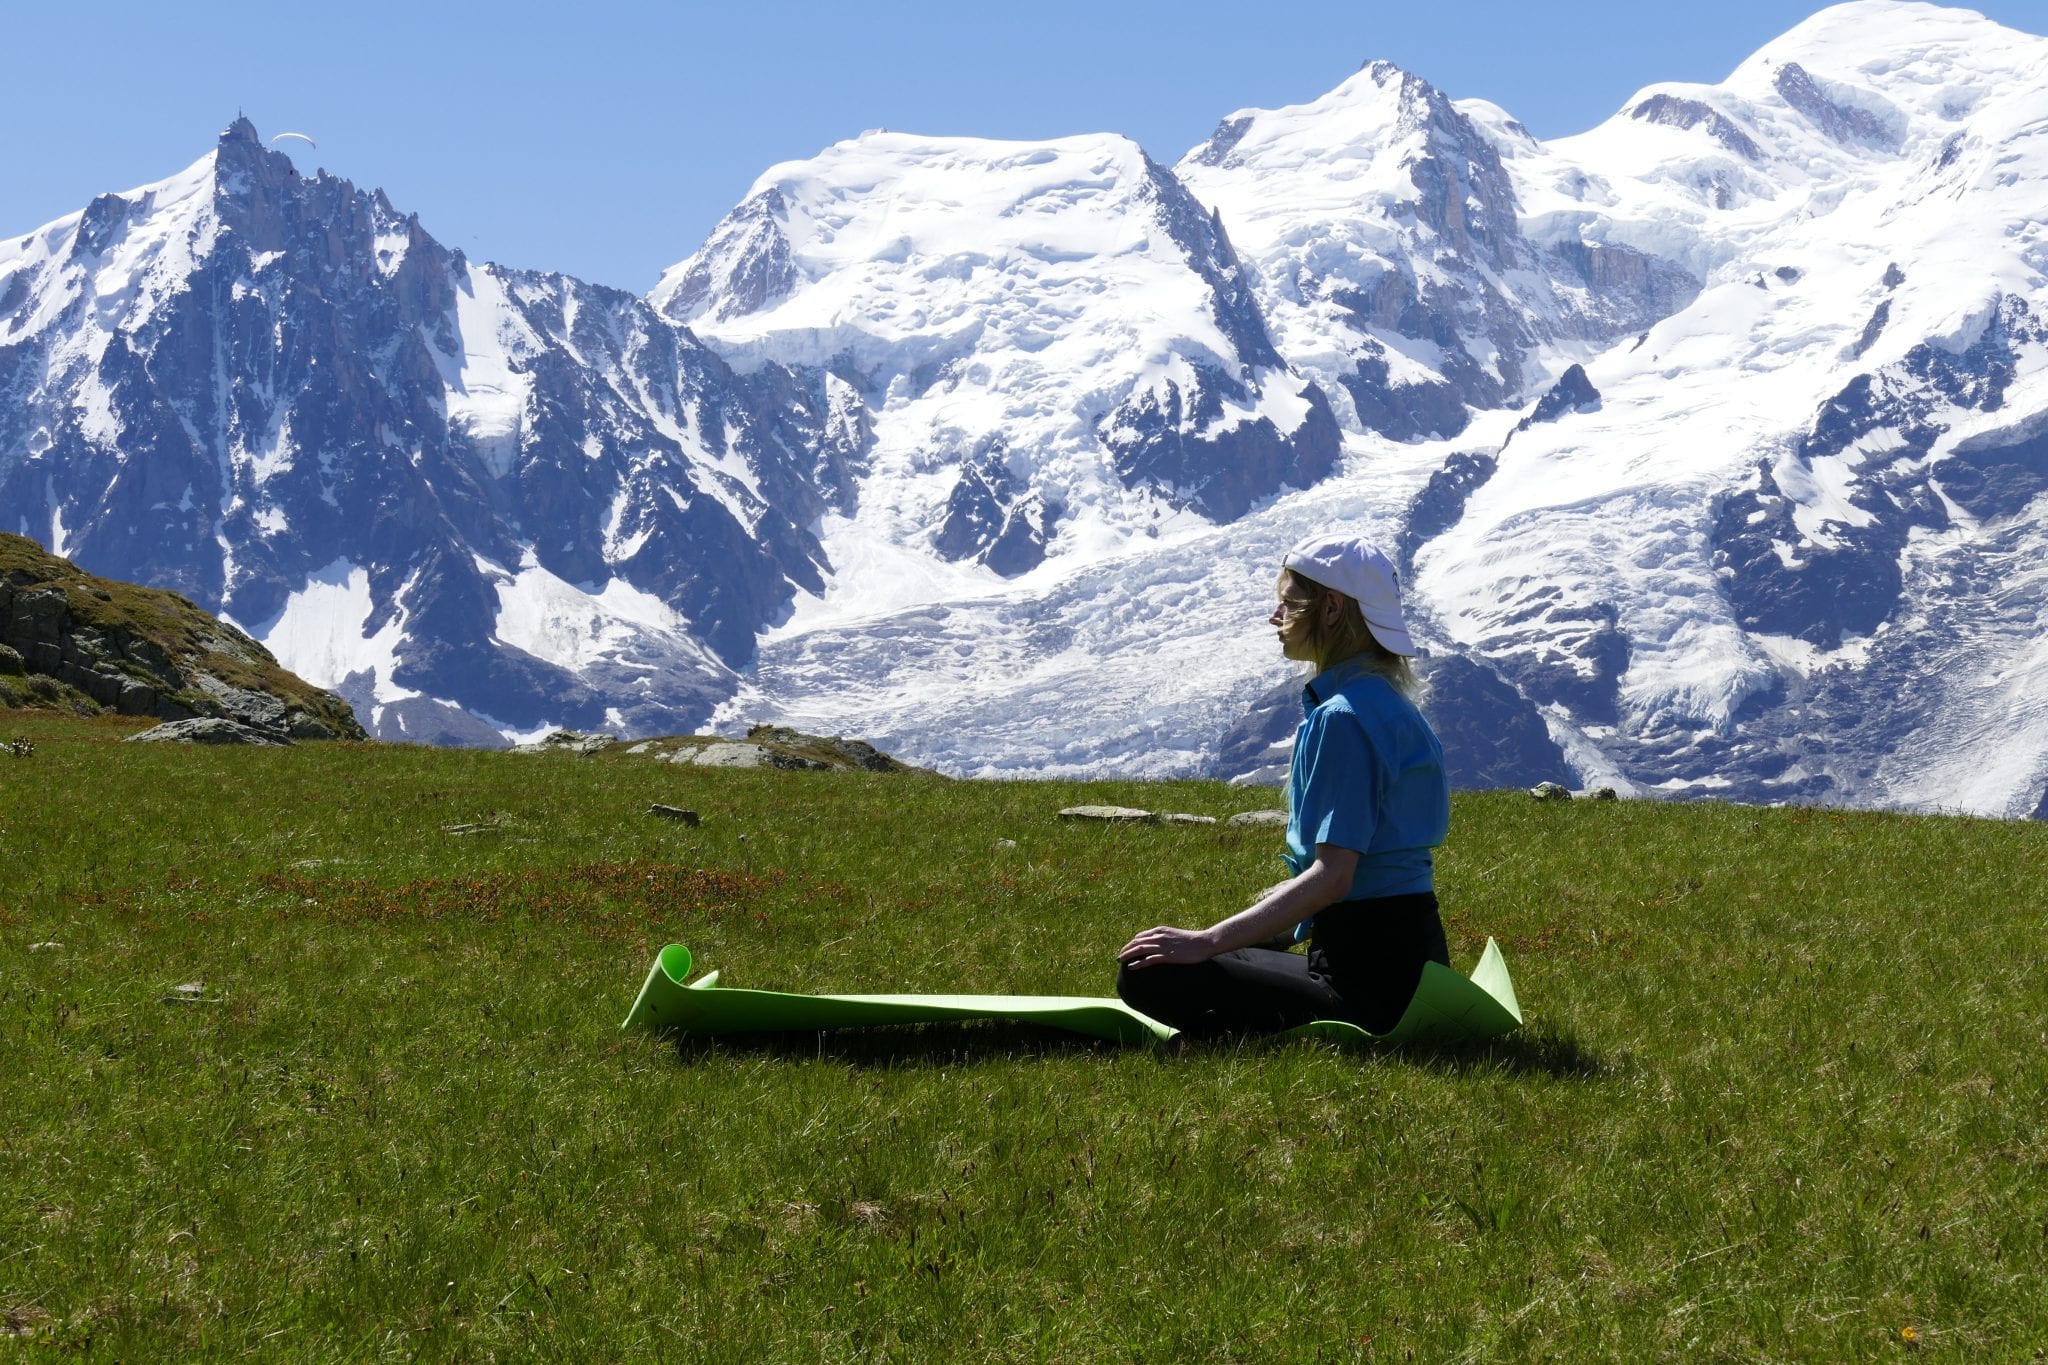 Yoga and adventure in the Alps